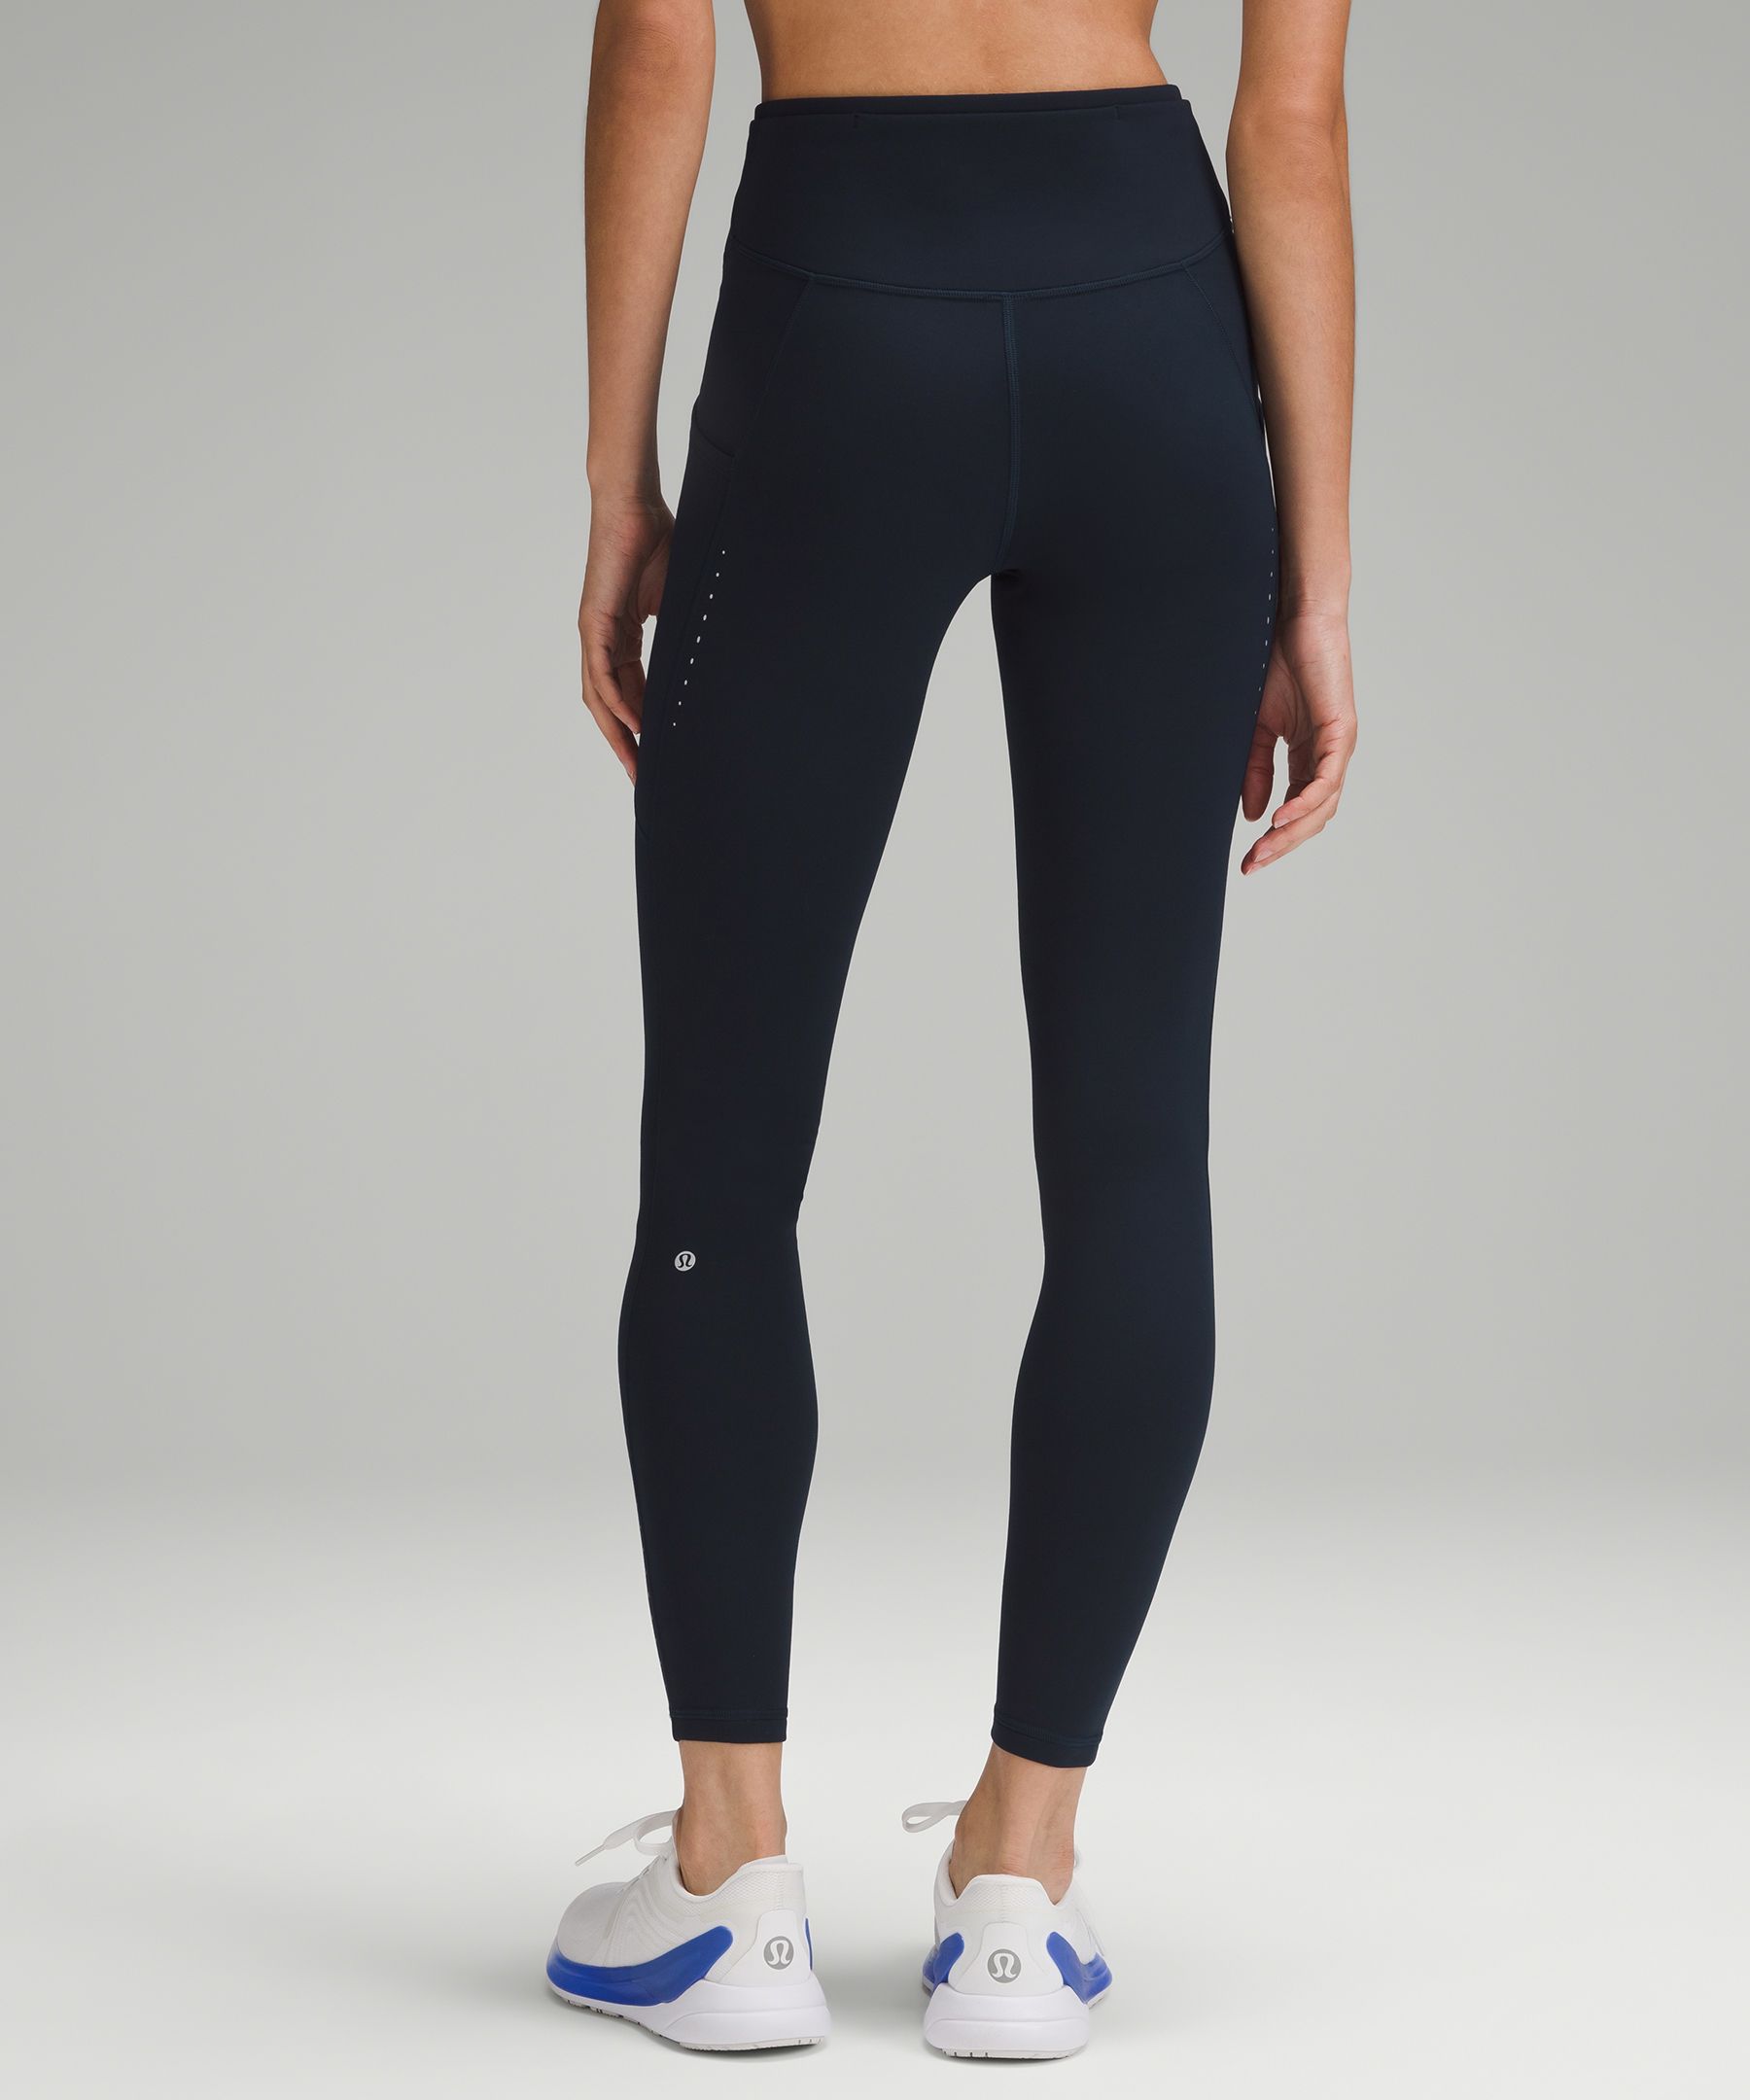 Lululemon Fast and Free High-Rise Tight 28 *Non-Reflective Suede